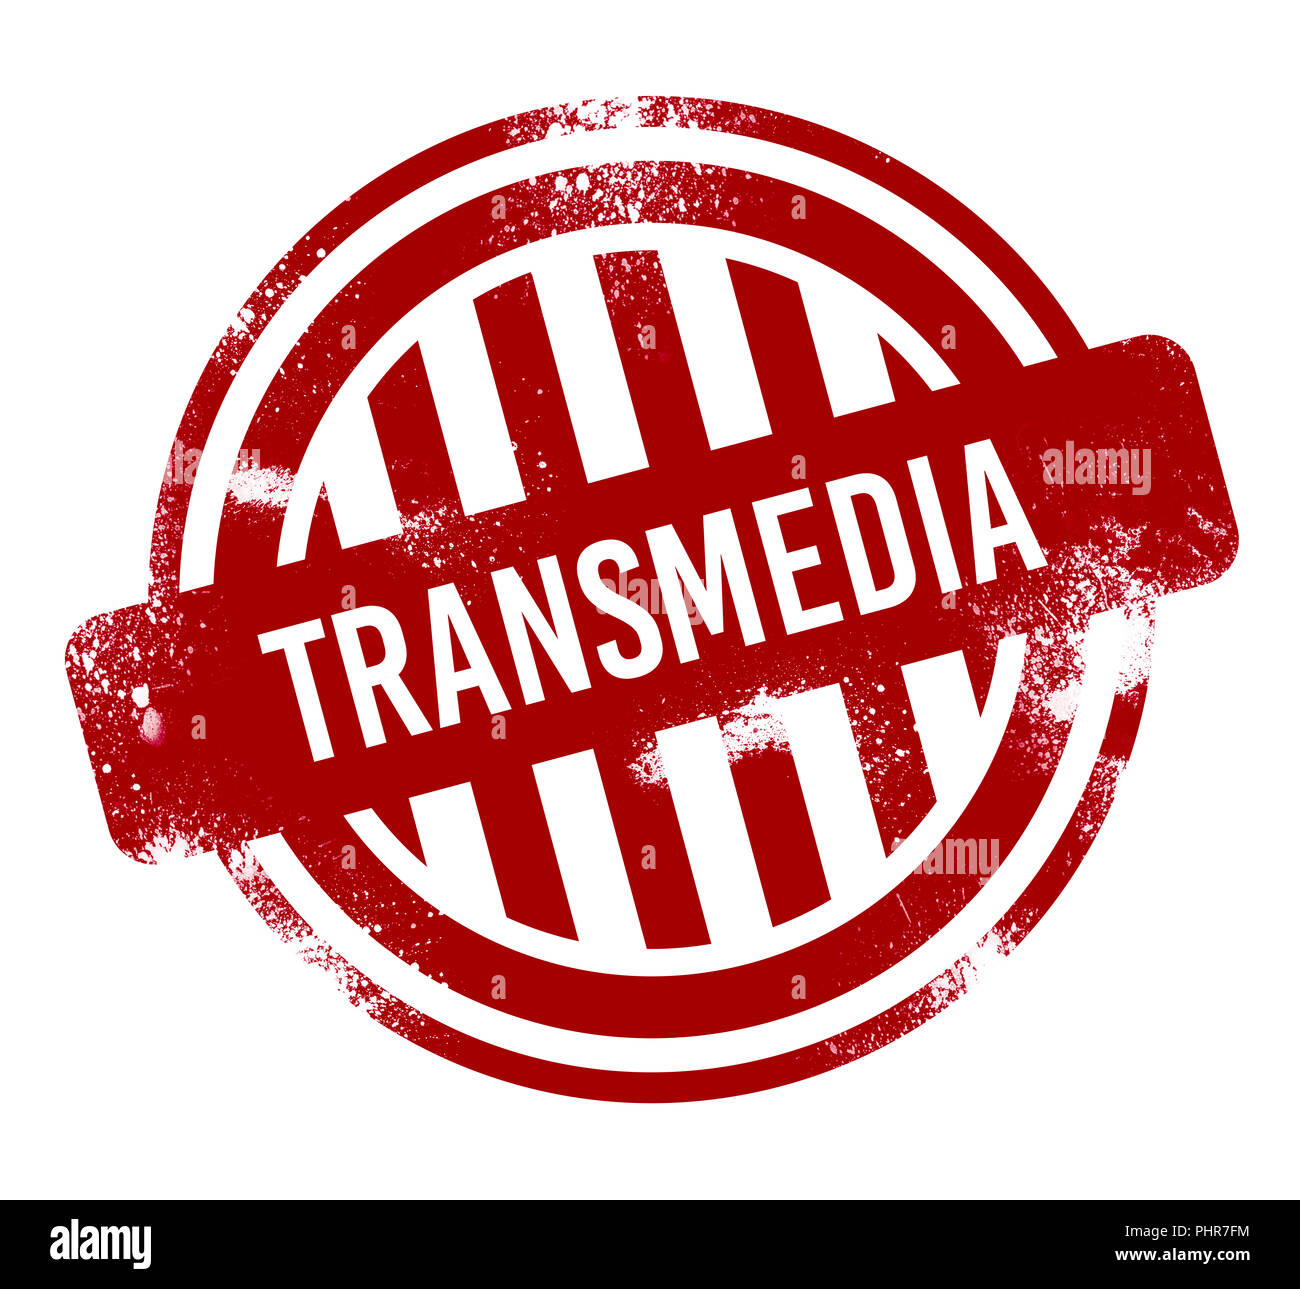 Transmedia - red grunge button, stamp Stock Photo